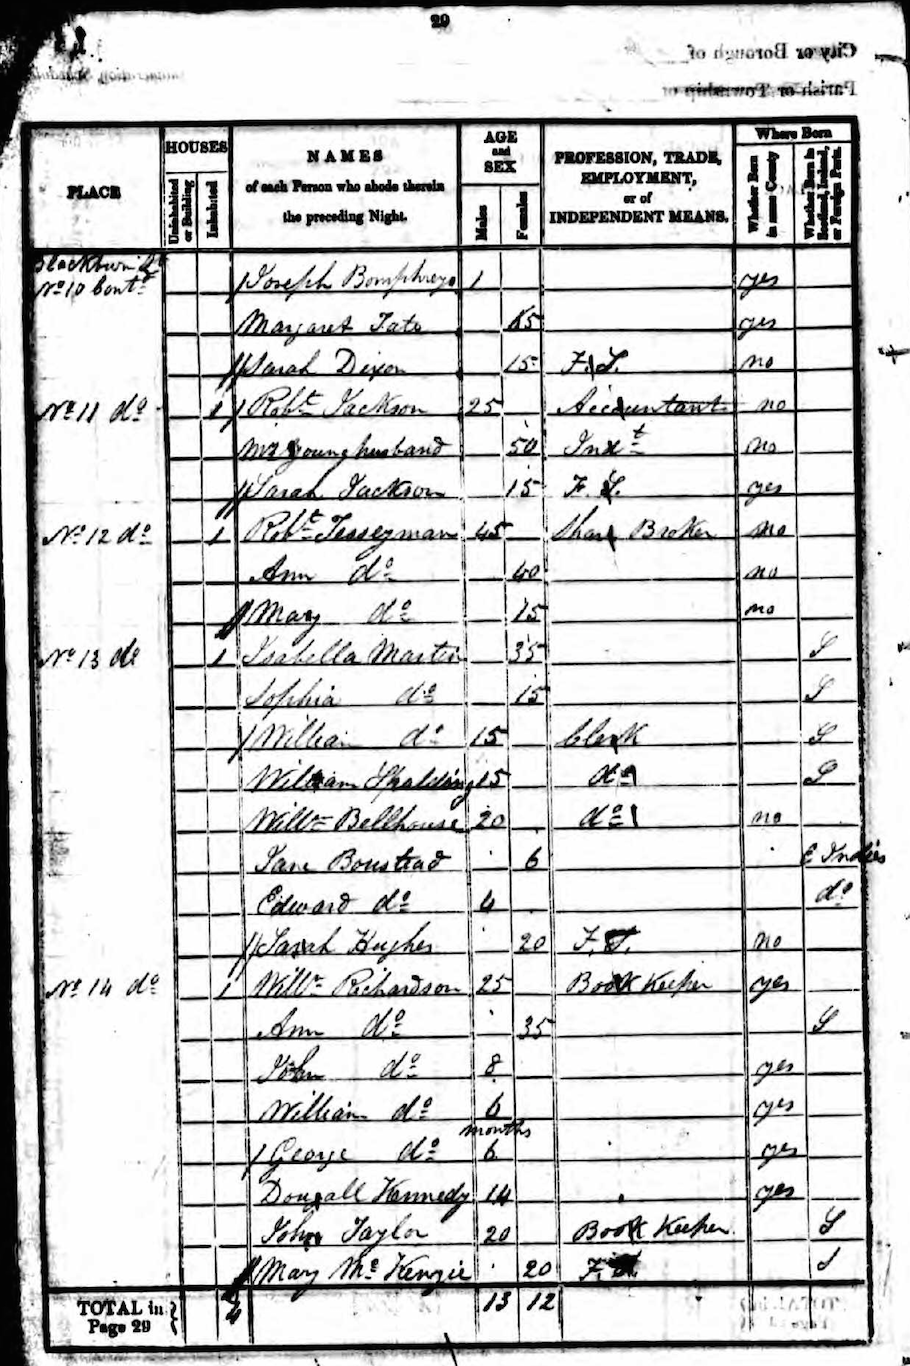 Edward and Jane Boustead on the 1841 census